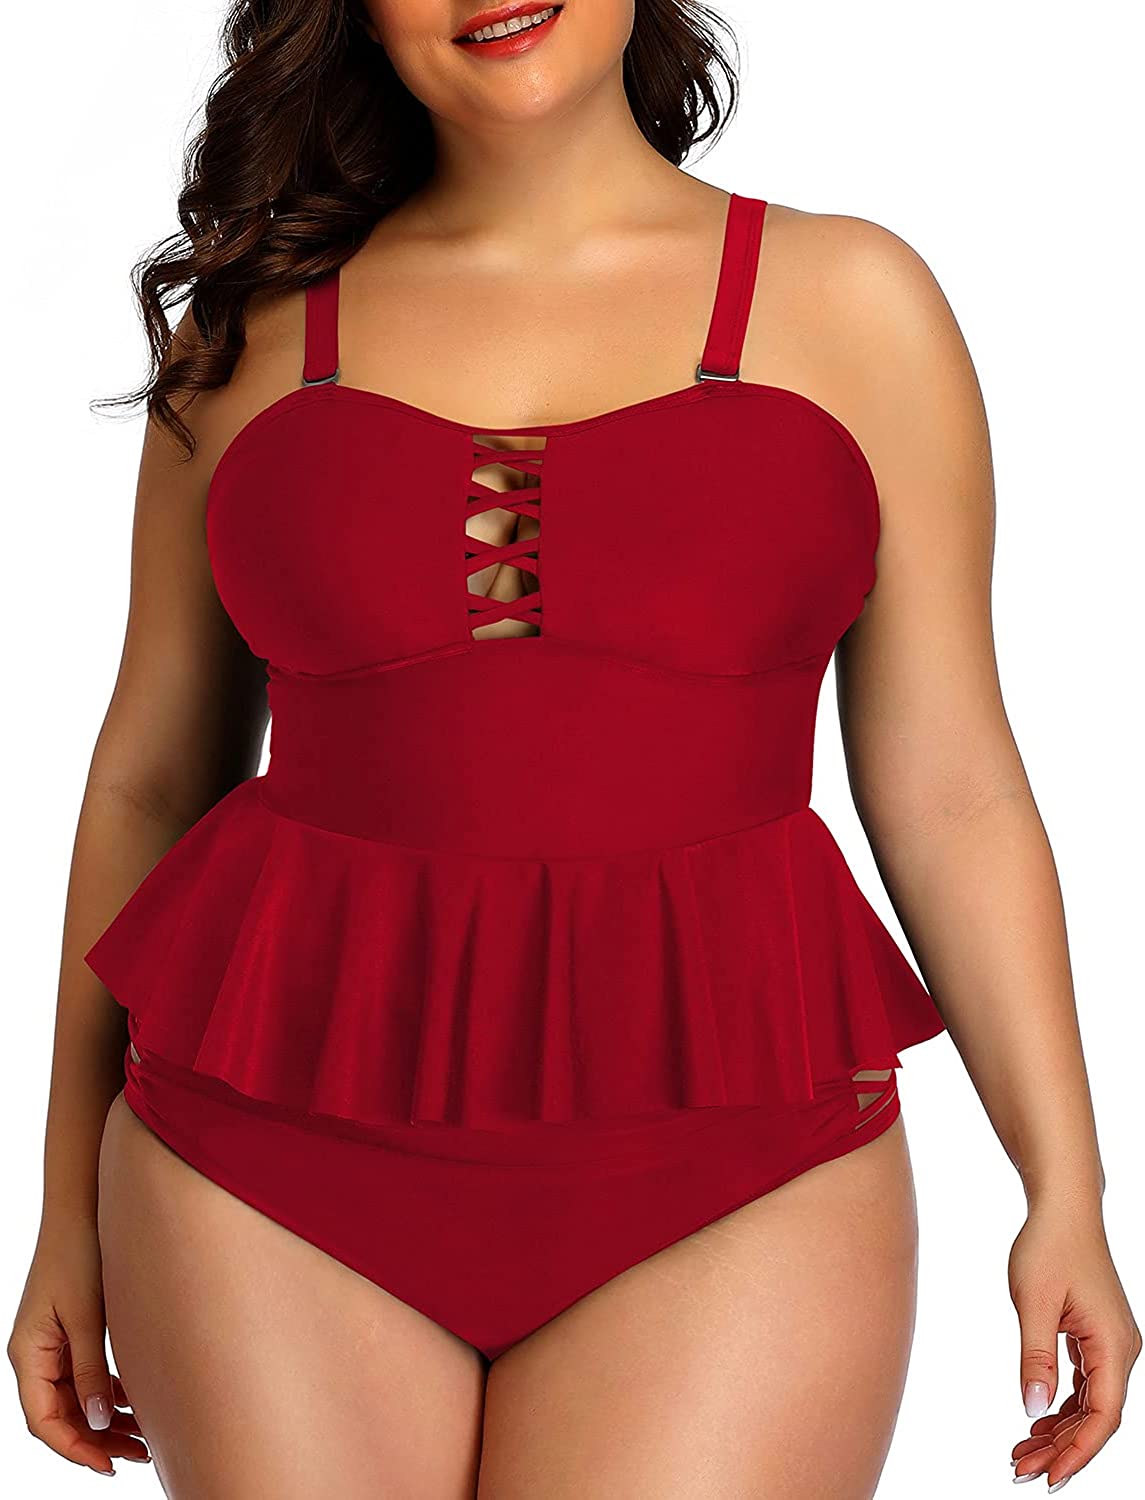 Yonique Plus Size Swimsuits for Women Tummy Control Two Piece Bathing Suits Peplum Tankini Tops High Waisted Swimwear 